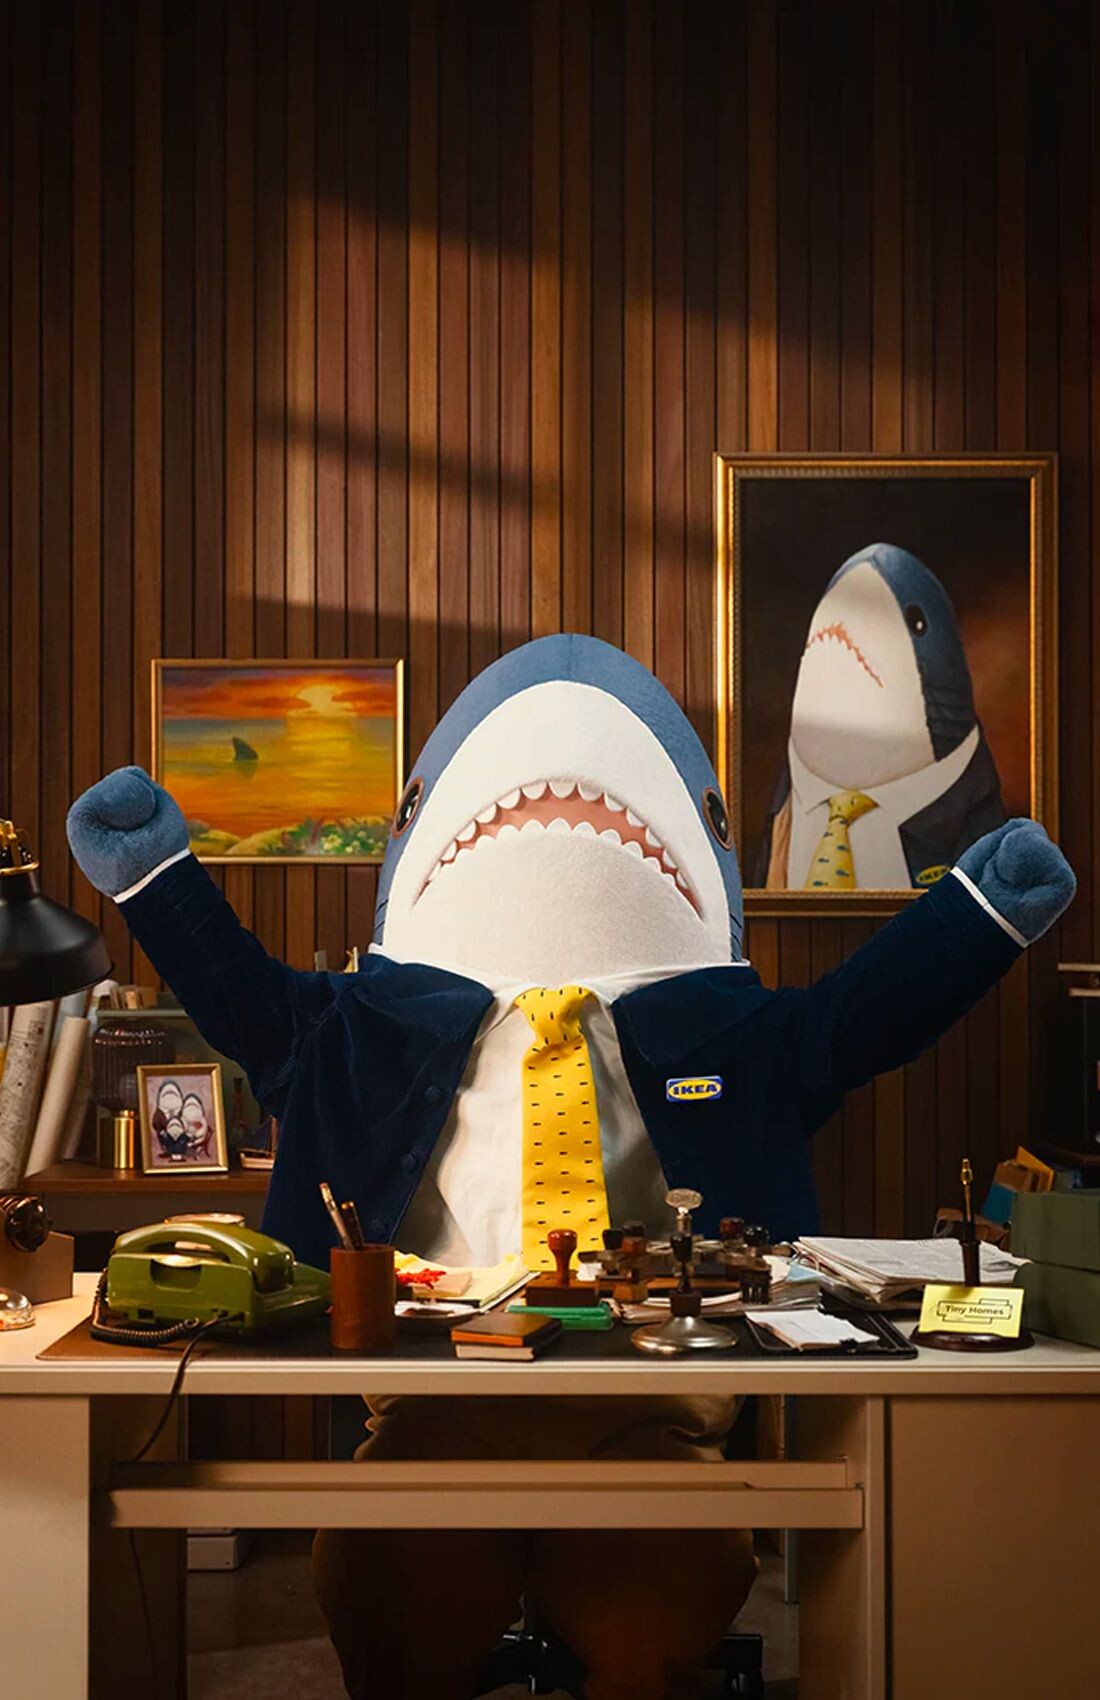 A full-size Blahaj (shark) mascot suit sitting at a desk. The shark is sitting down at the desk with its arms raised in triumph. The Blahaj is wearing light brown trousers, a dark blue jacket and a yellow tie. The desk is littered with various stationary items. The wall behind is vertical wood panelling with various paintings of sharks